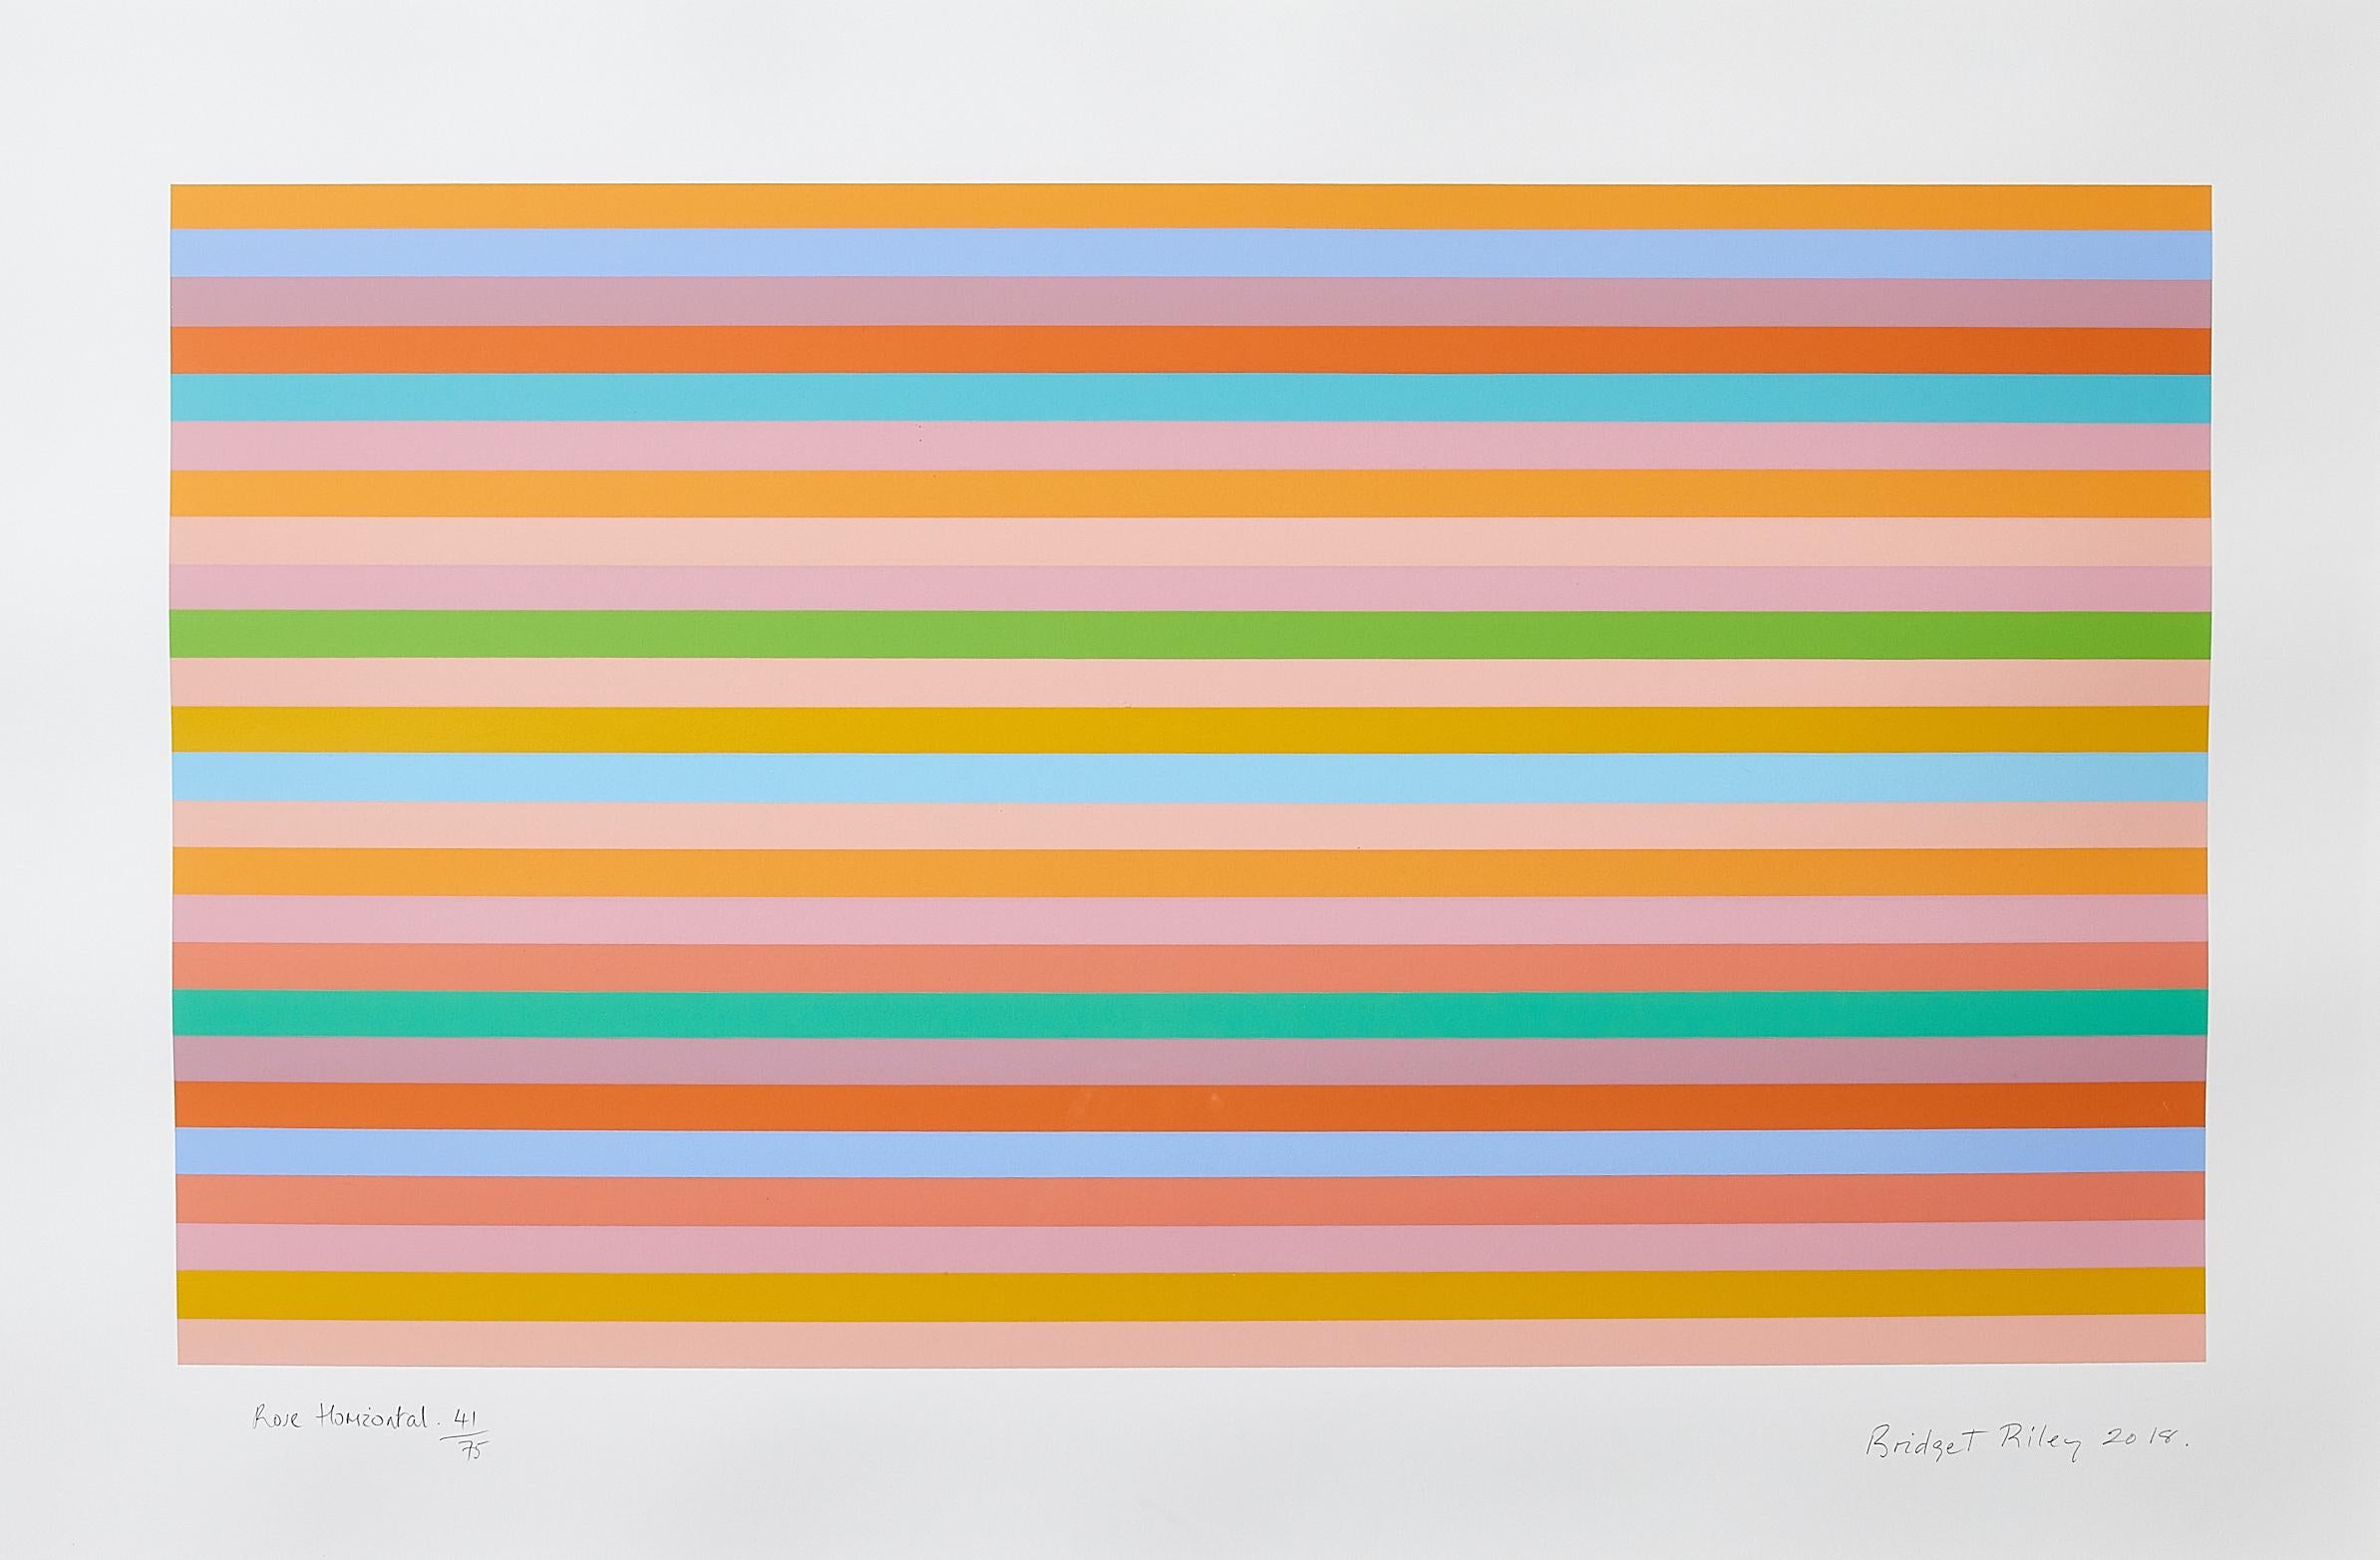 BRIDGET RILEY
Rose Horizontal, 2018

Screenprint in colours, on Fabriano 5 paper
Signed, titled, dated and numbered from the edition of 75
Printed by Artizan Editions, Forest of Dean
Image: 47.7 x 82.3 cm (18.7 x 32.4 in)
Sheet: 64.3 x 97.6 cm (25.3